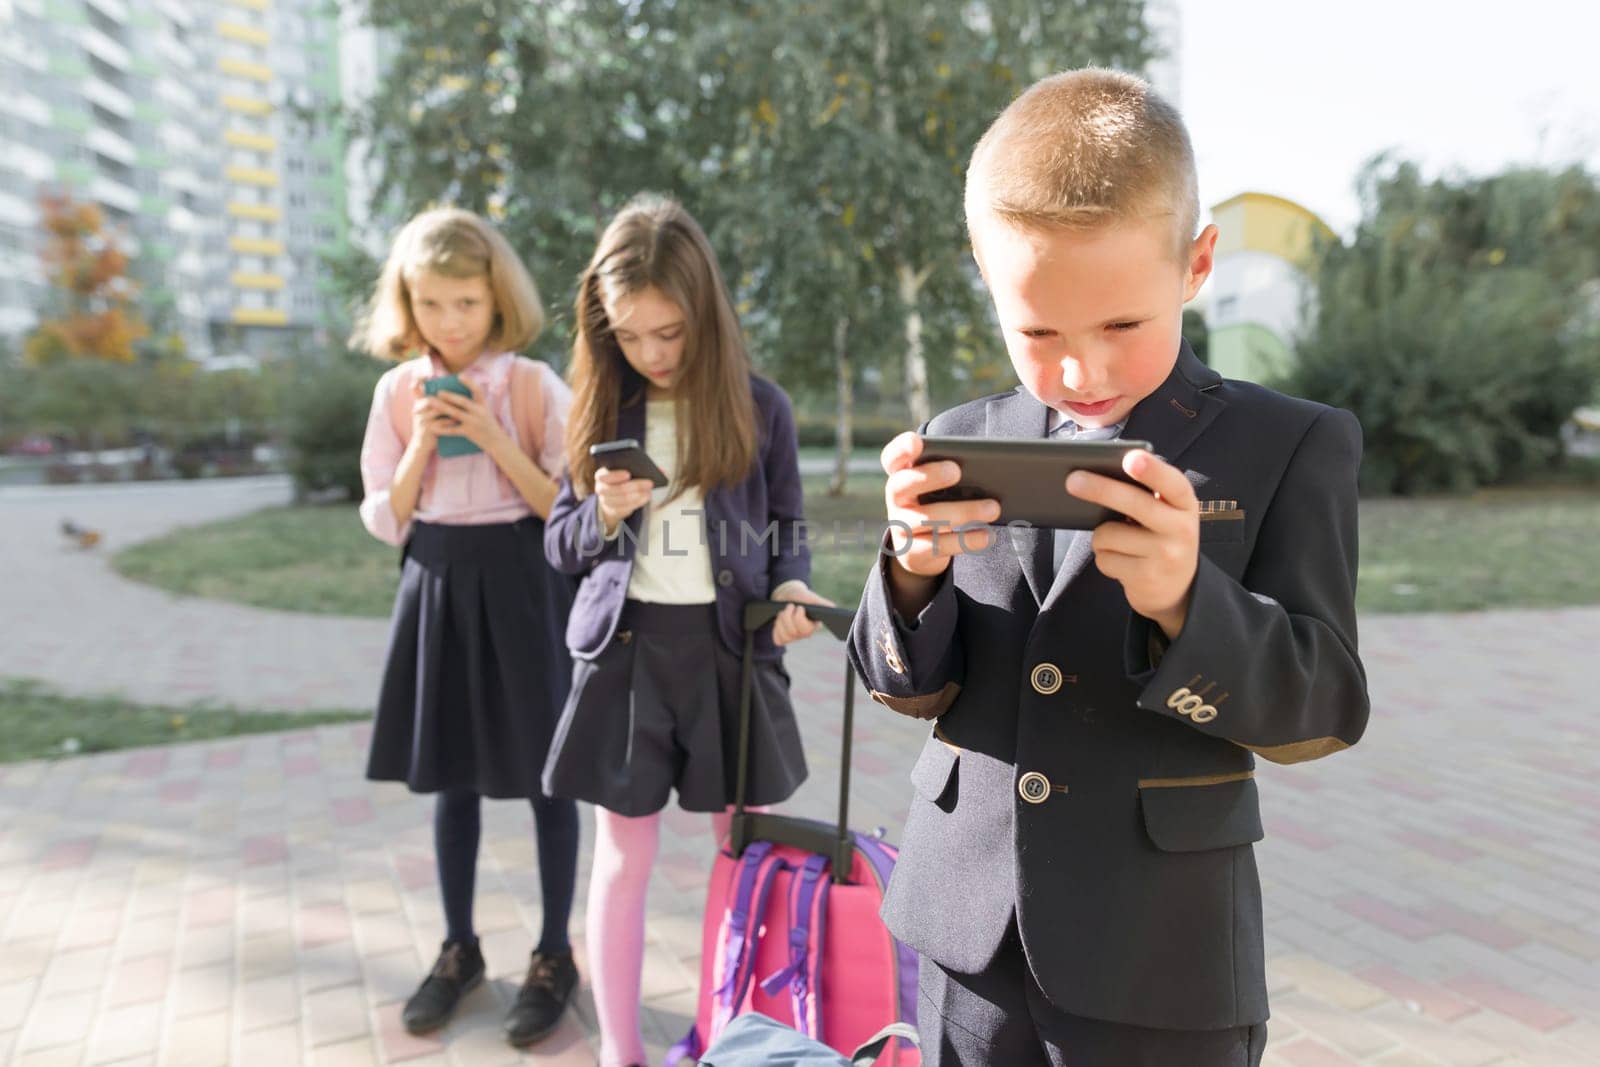 Children of elementary age with smartphones, backpacks, outdoor background. Education, friendship, technology and people concept